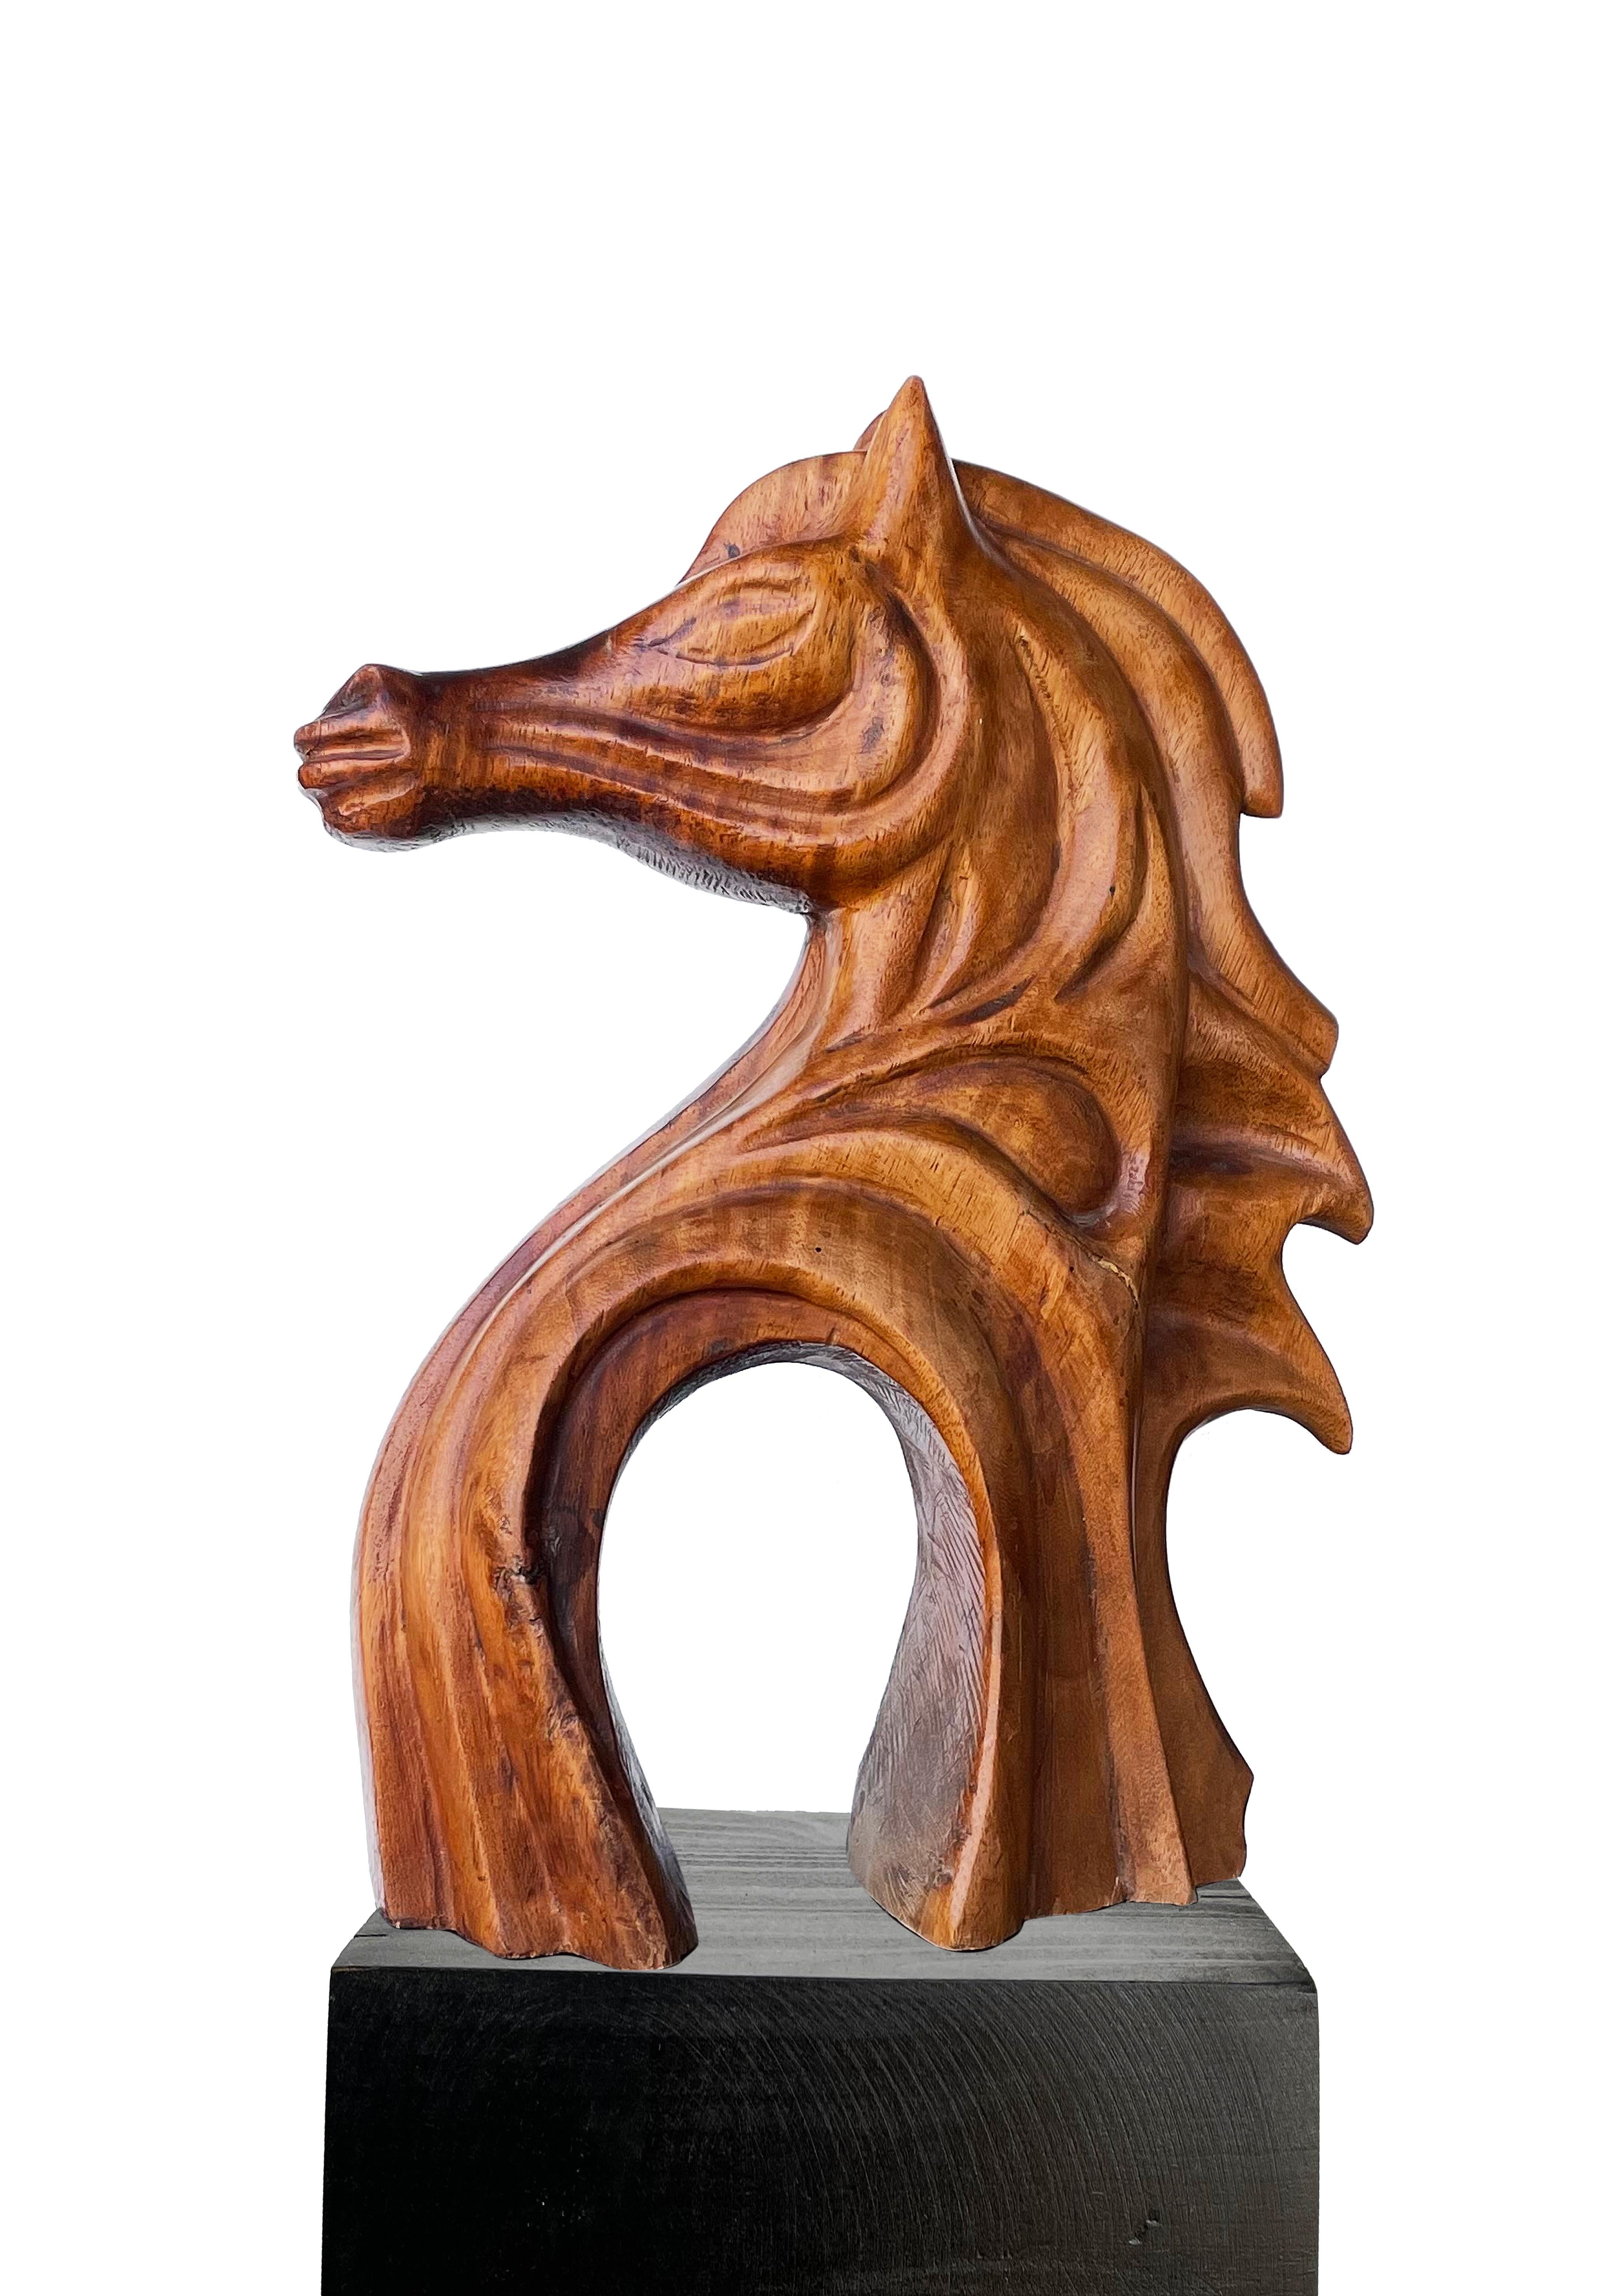 "Grecian Stallion II" Sculpture 19" x 9" inch by Ibrahim Abd Elmalak

Wood
Signed & Dated


Sculptures that mostly depict his characteristic figures of feminine form and feeling – a central element to Abd Elmalak’s creative process – which he